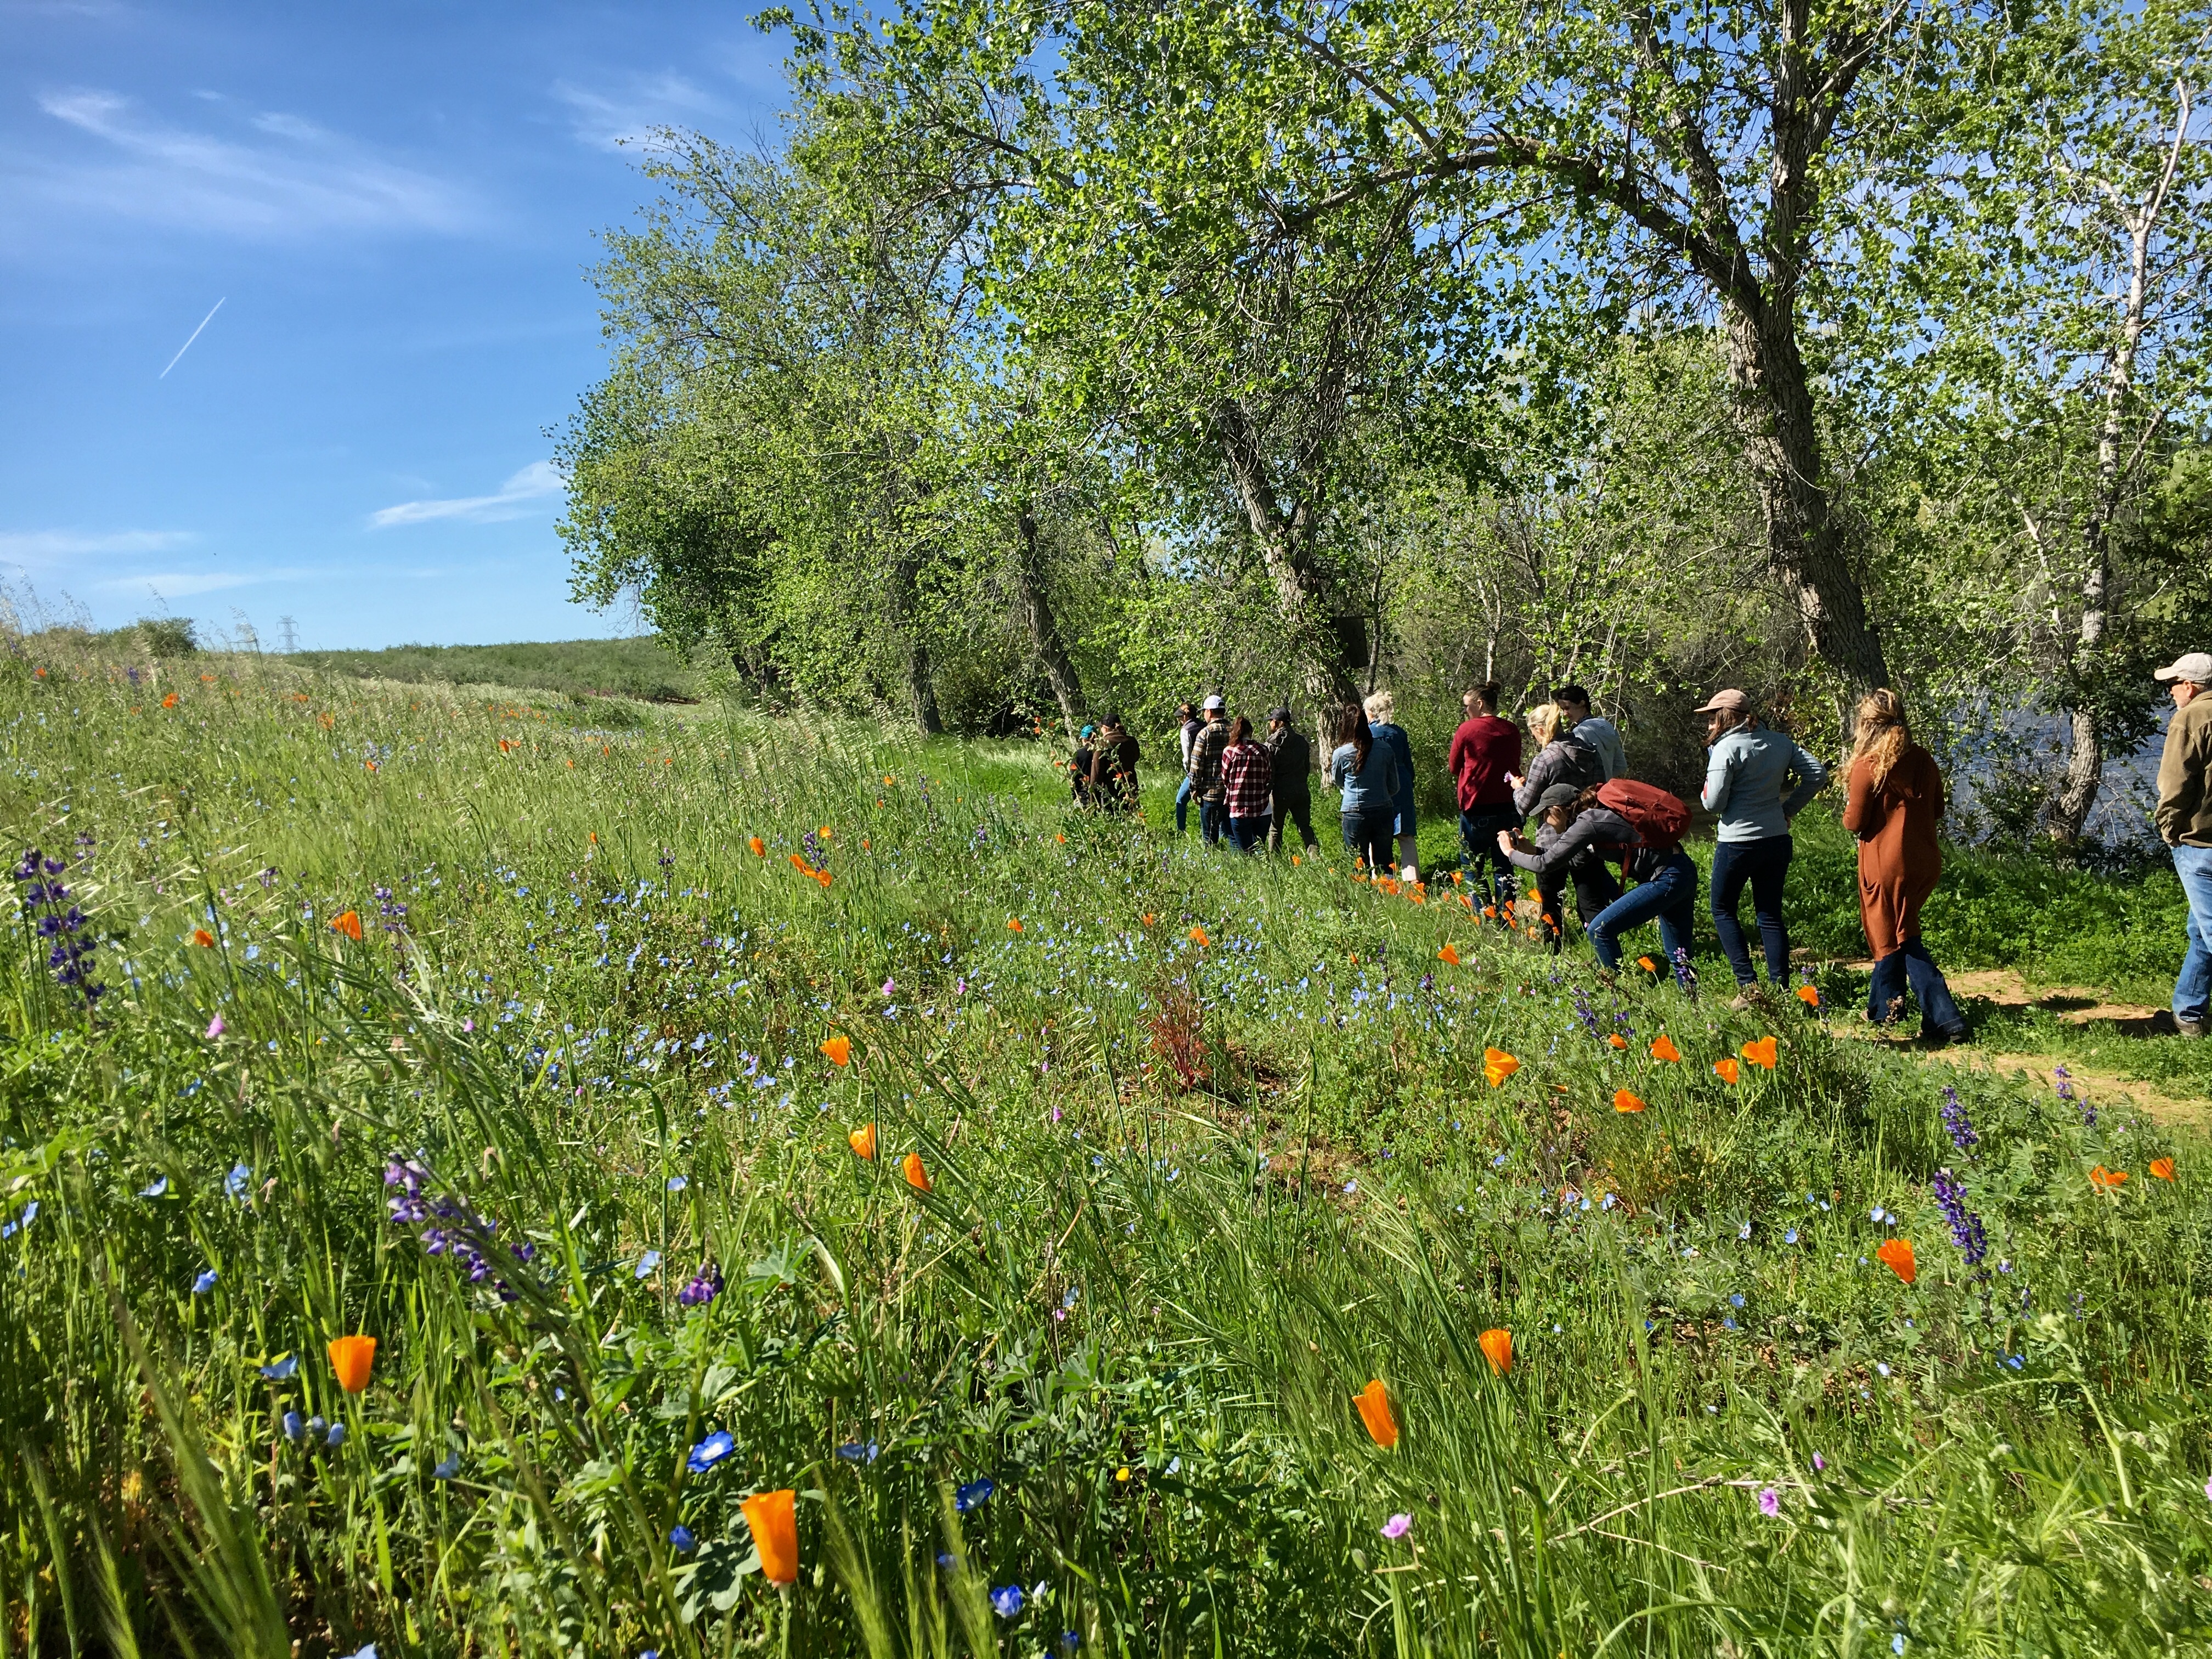 At the base of a round hill studded with colorful flowers, a group of people walks in single file.